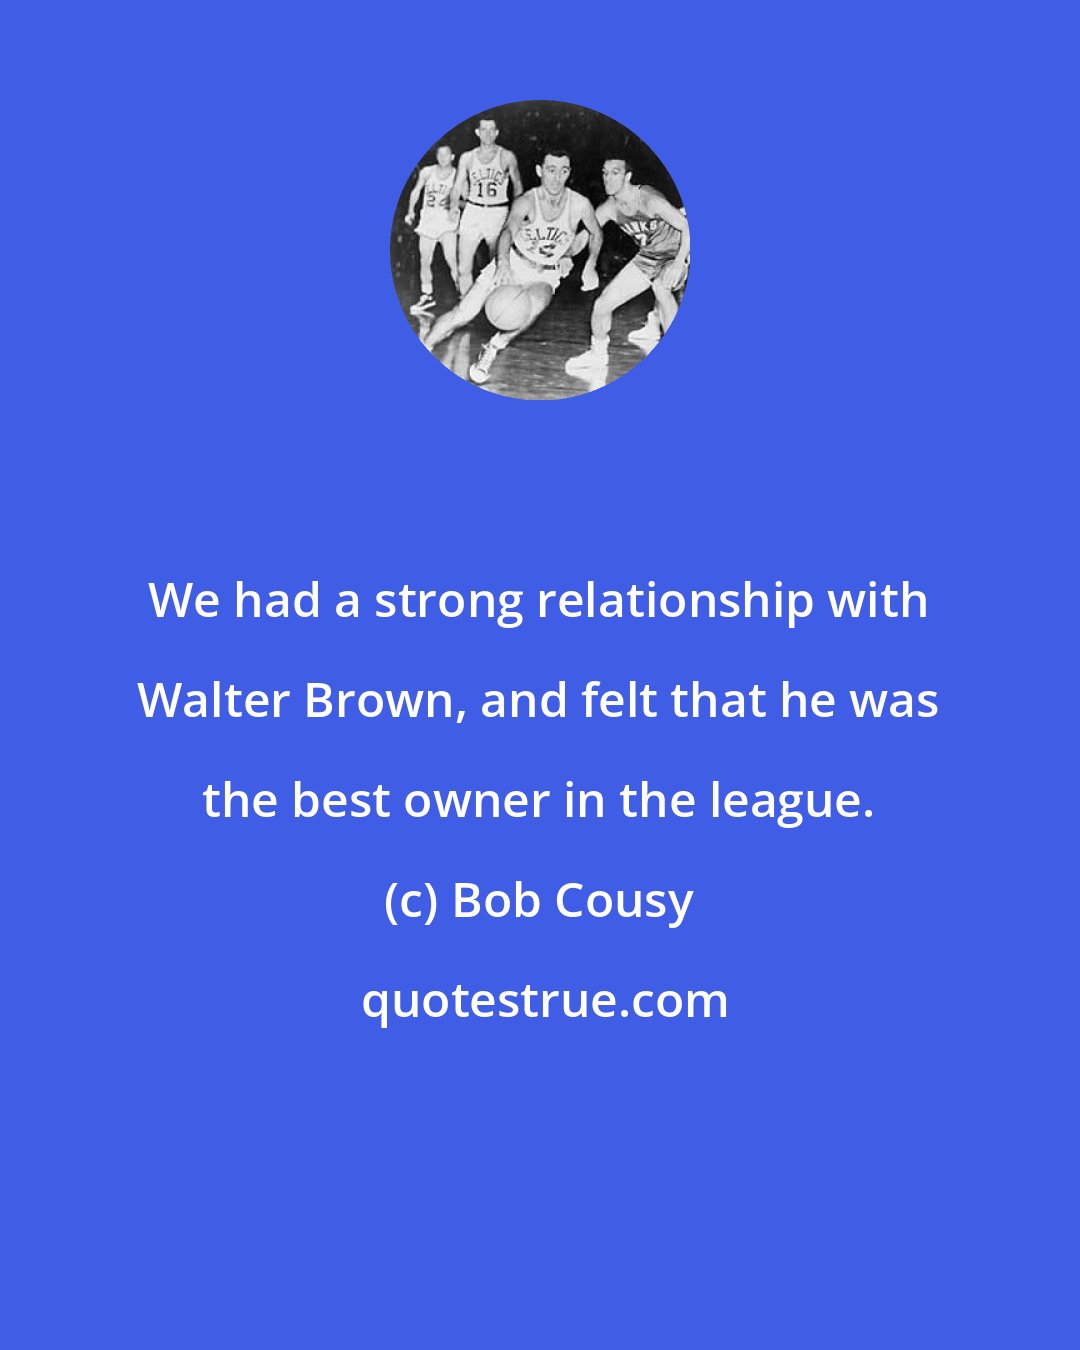 Bob Cousy: We had a strong relationship with Walter Brown, and felt that he was the best owner in the league.